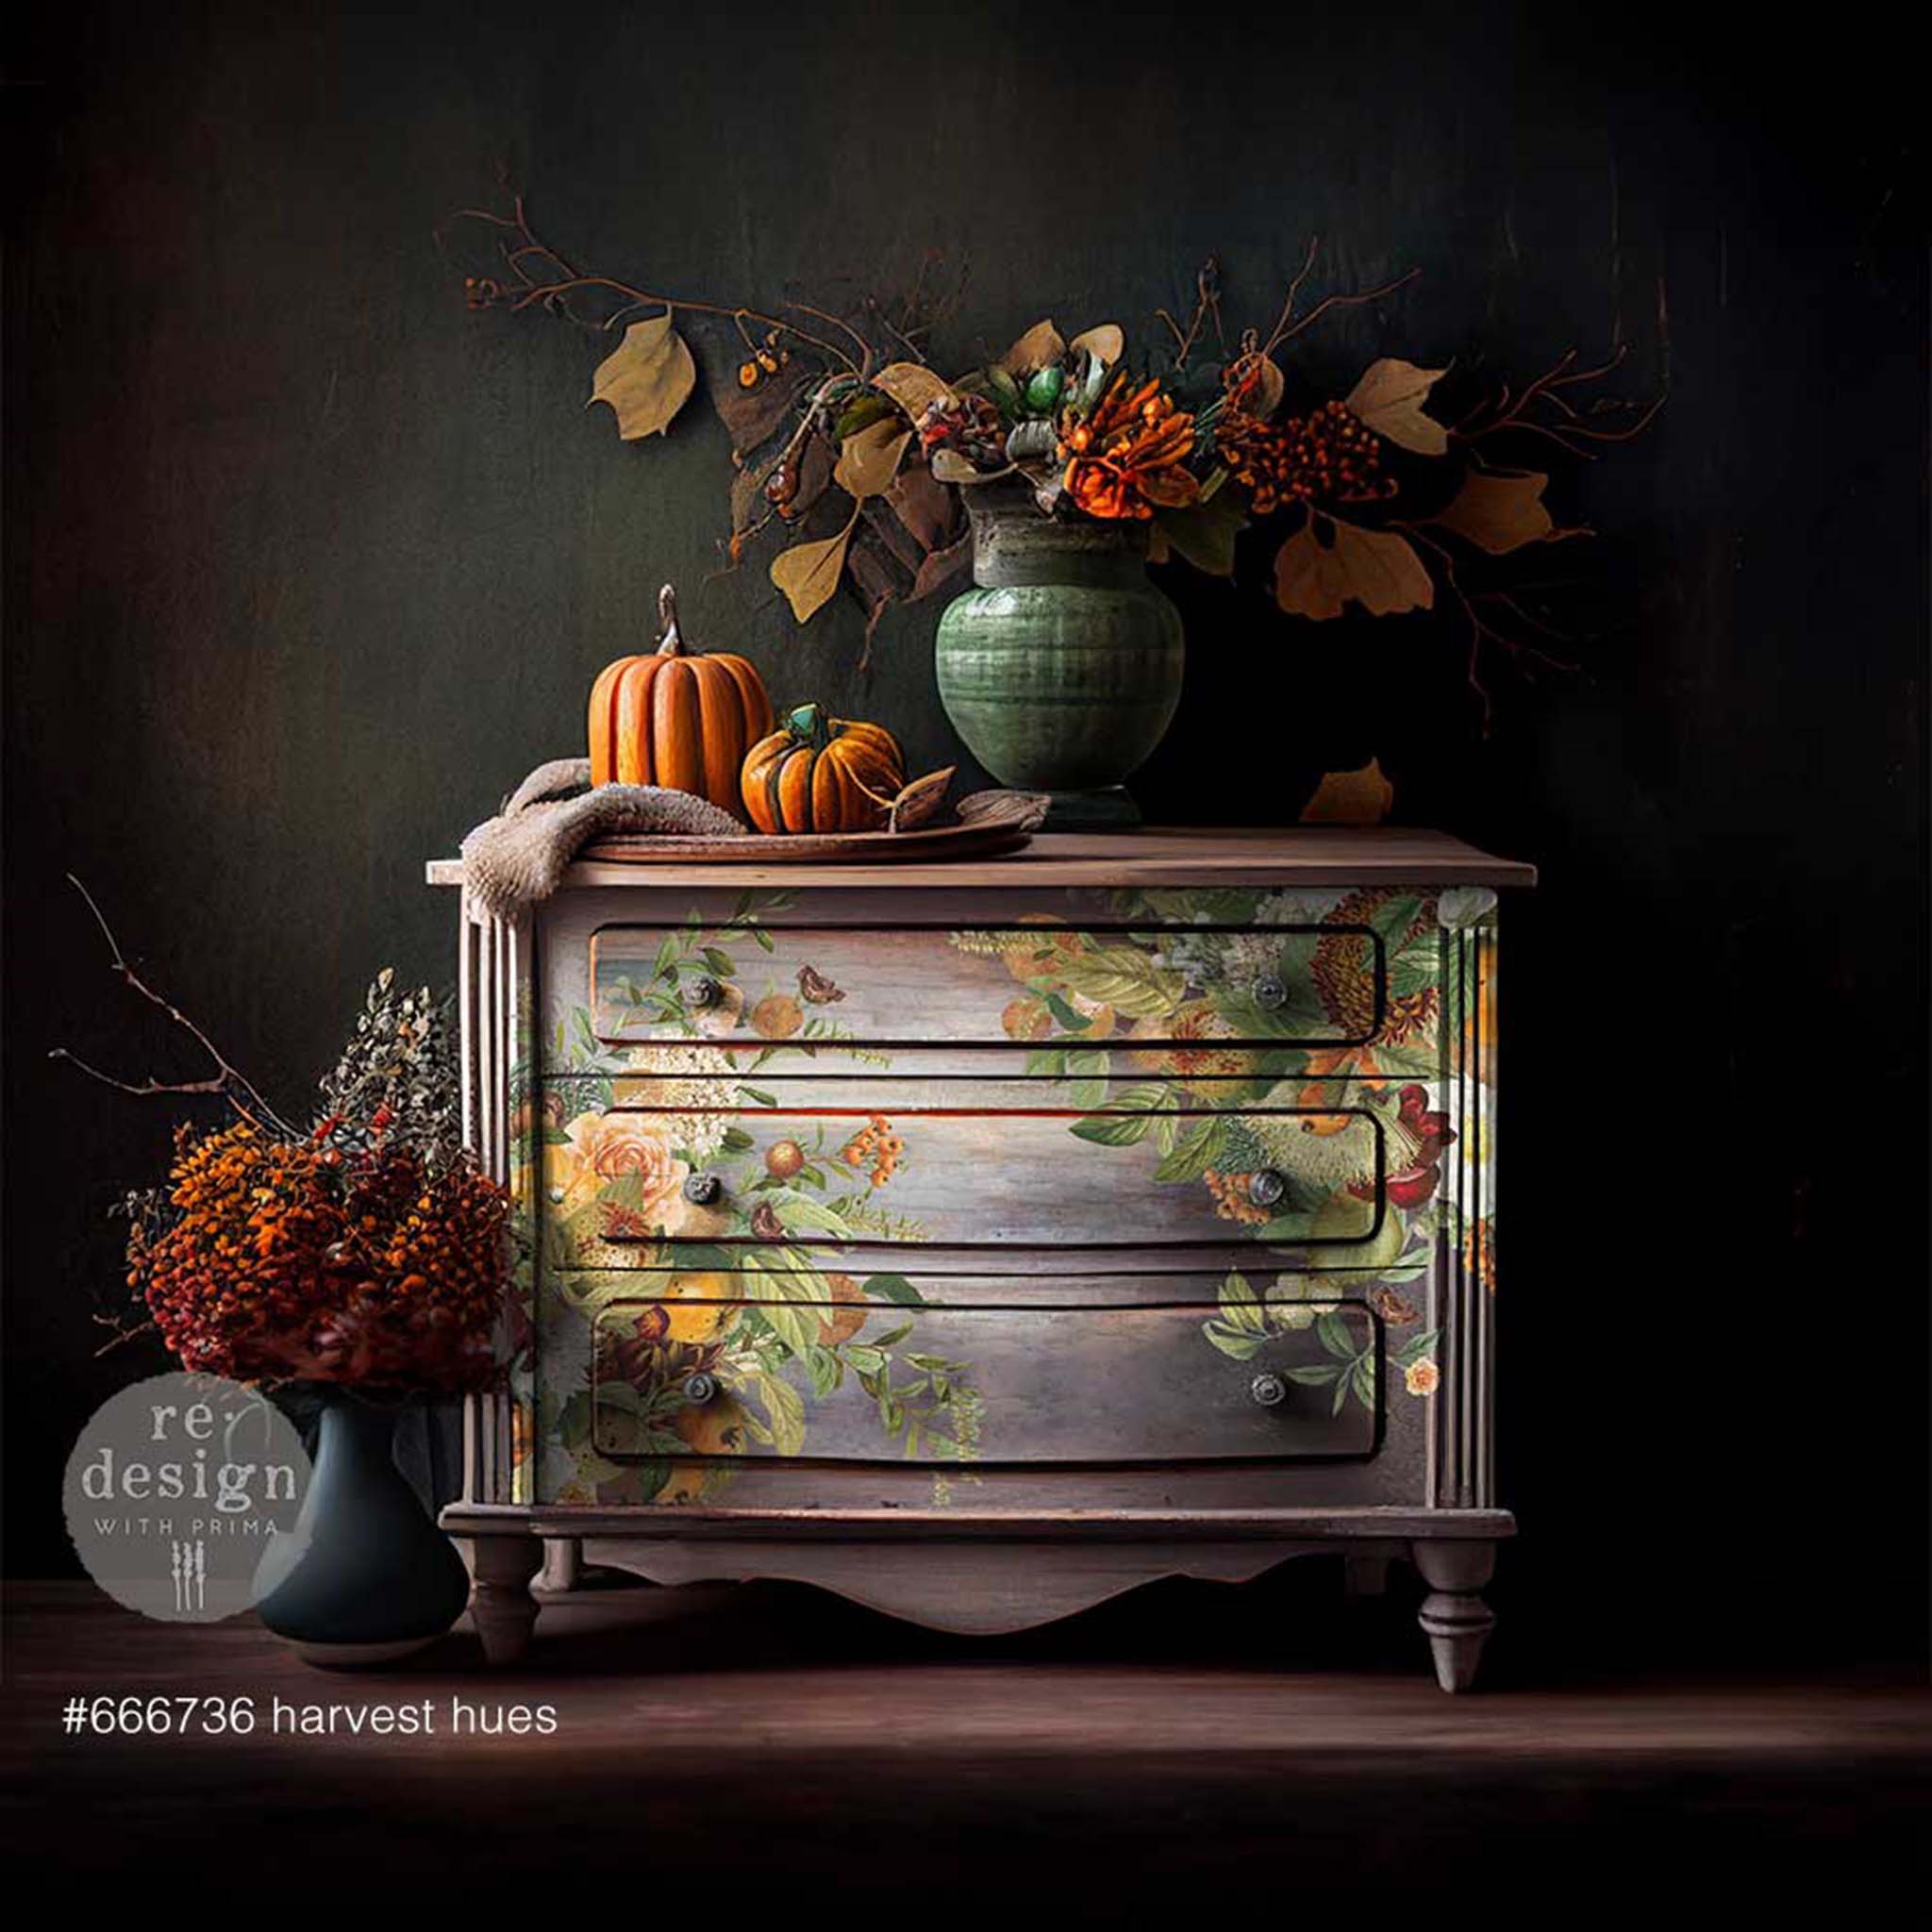 A vintage dresser is painted a blend of light grey and mauve and features ReDesign with Prima's Harvest Hues transfer on the front.